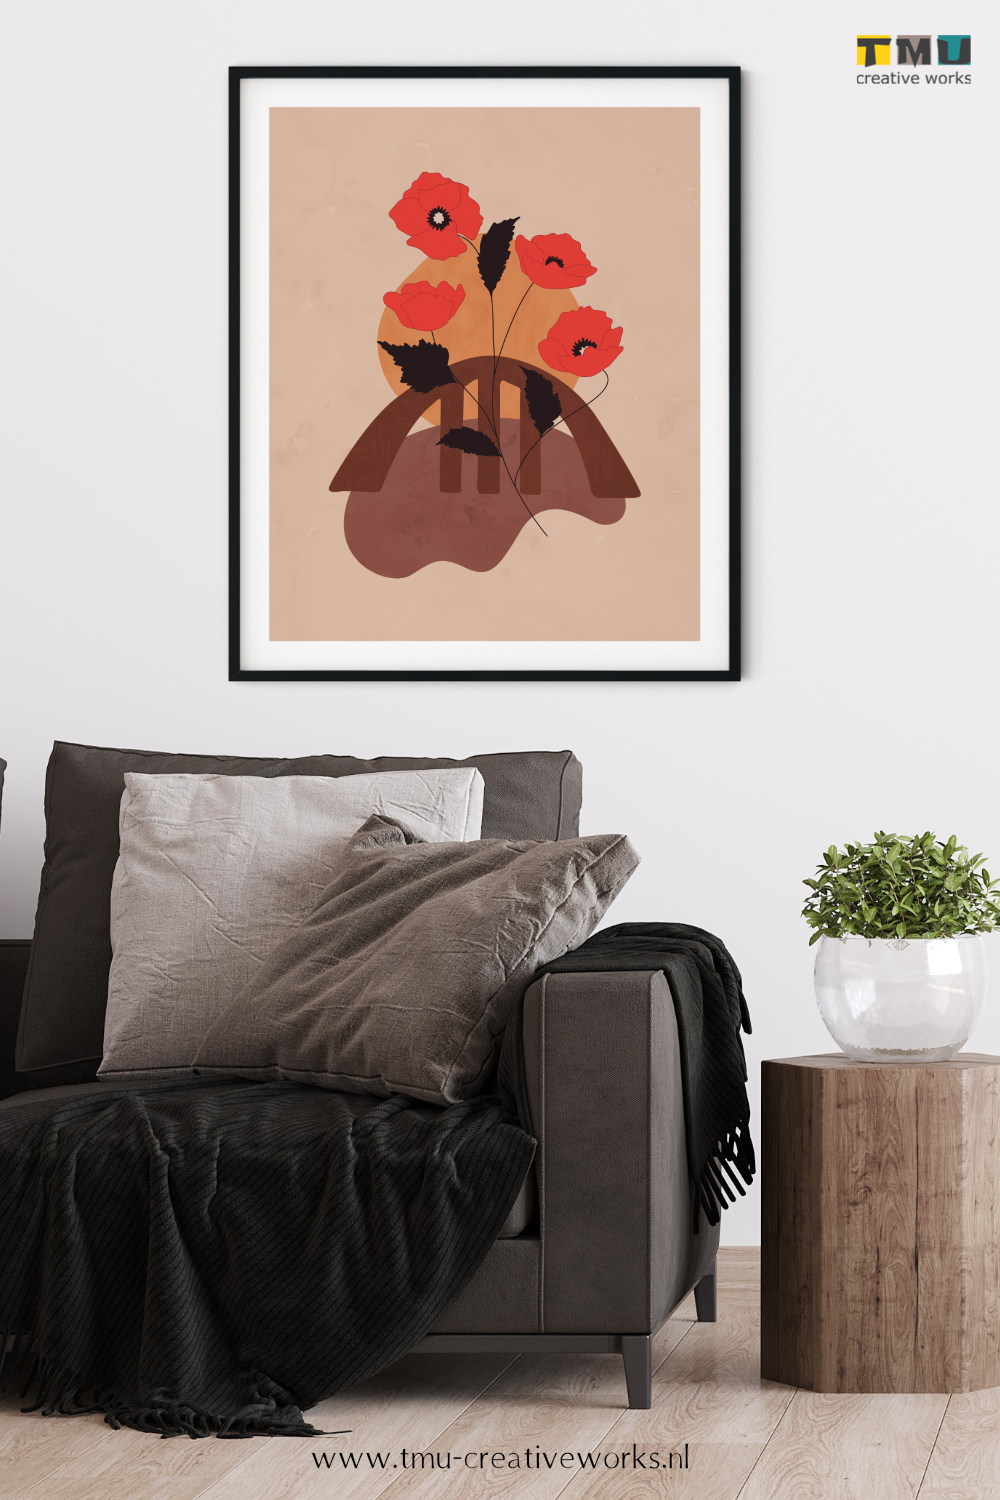 abstract and minimalist art in warm living room colors - mockup 6